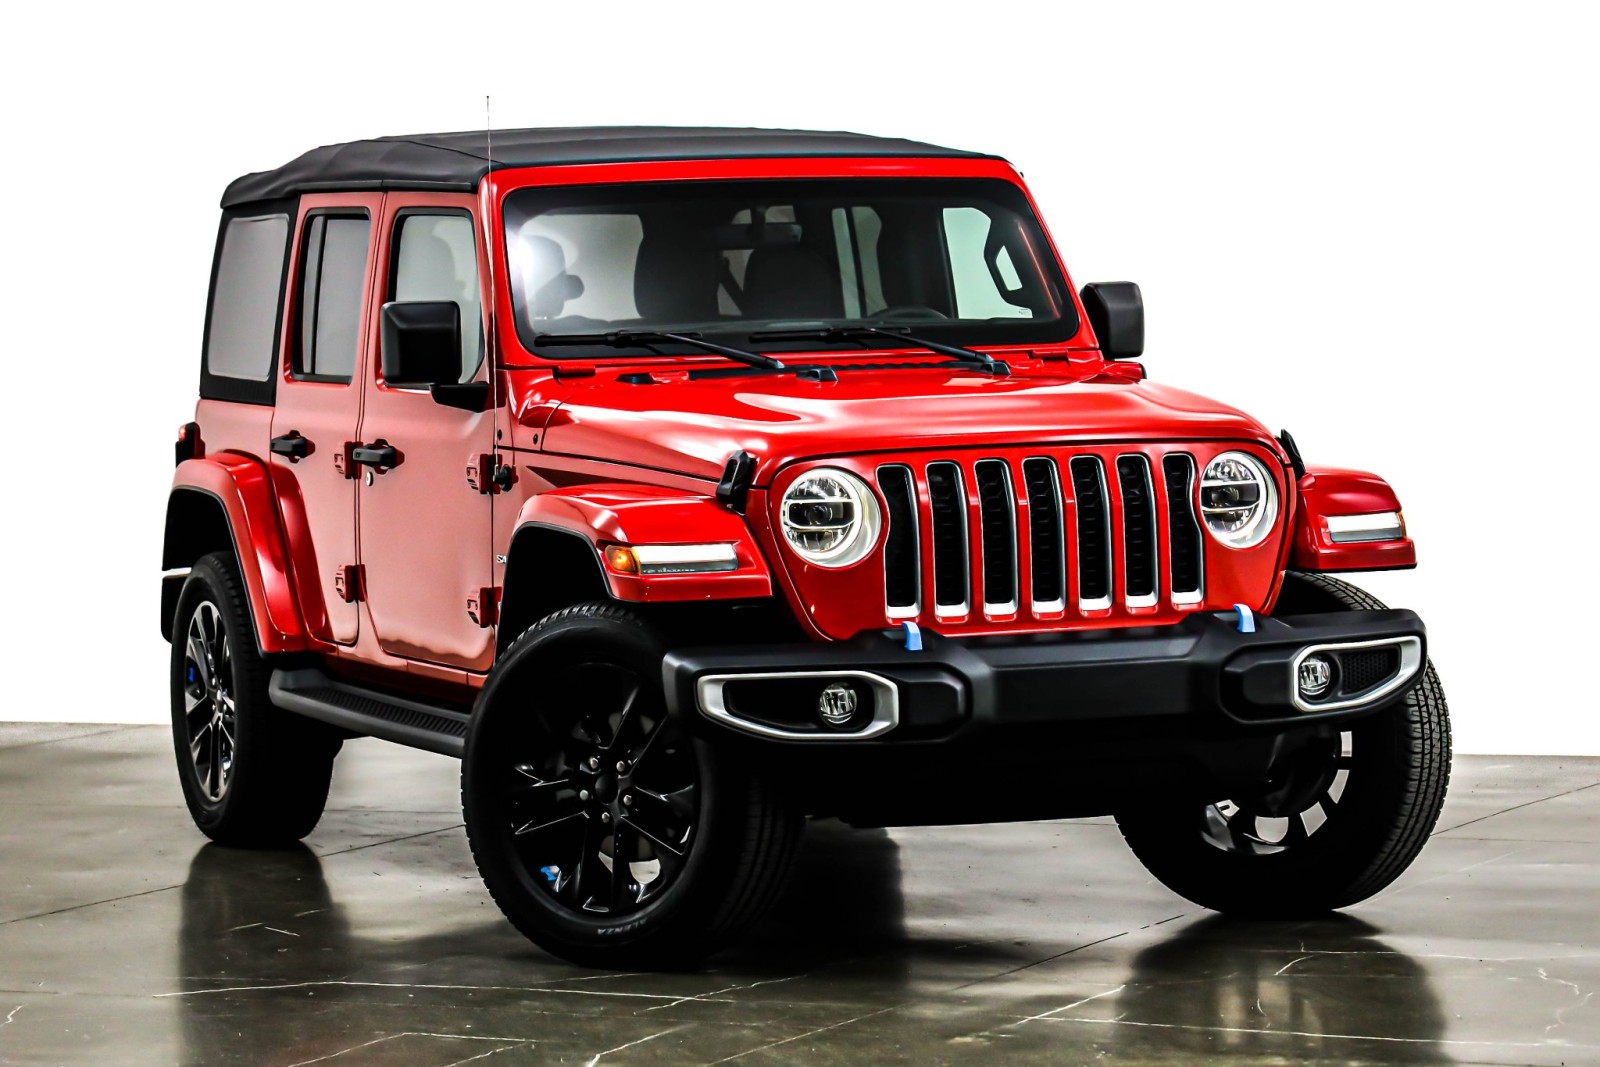 Used Jeep Wrangler Unlimited for sale in San Diego, CA | Roadster